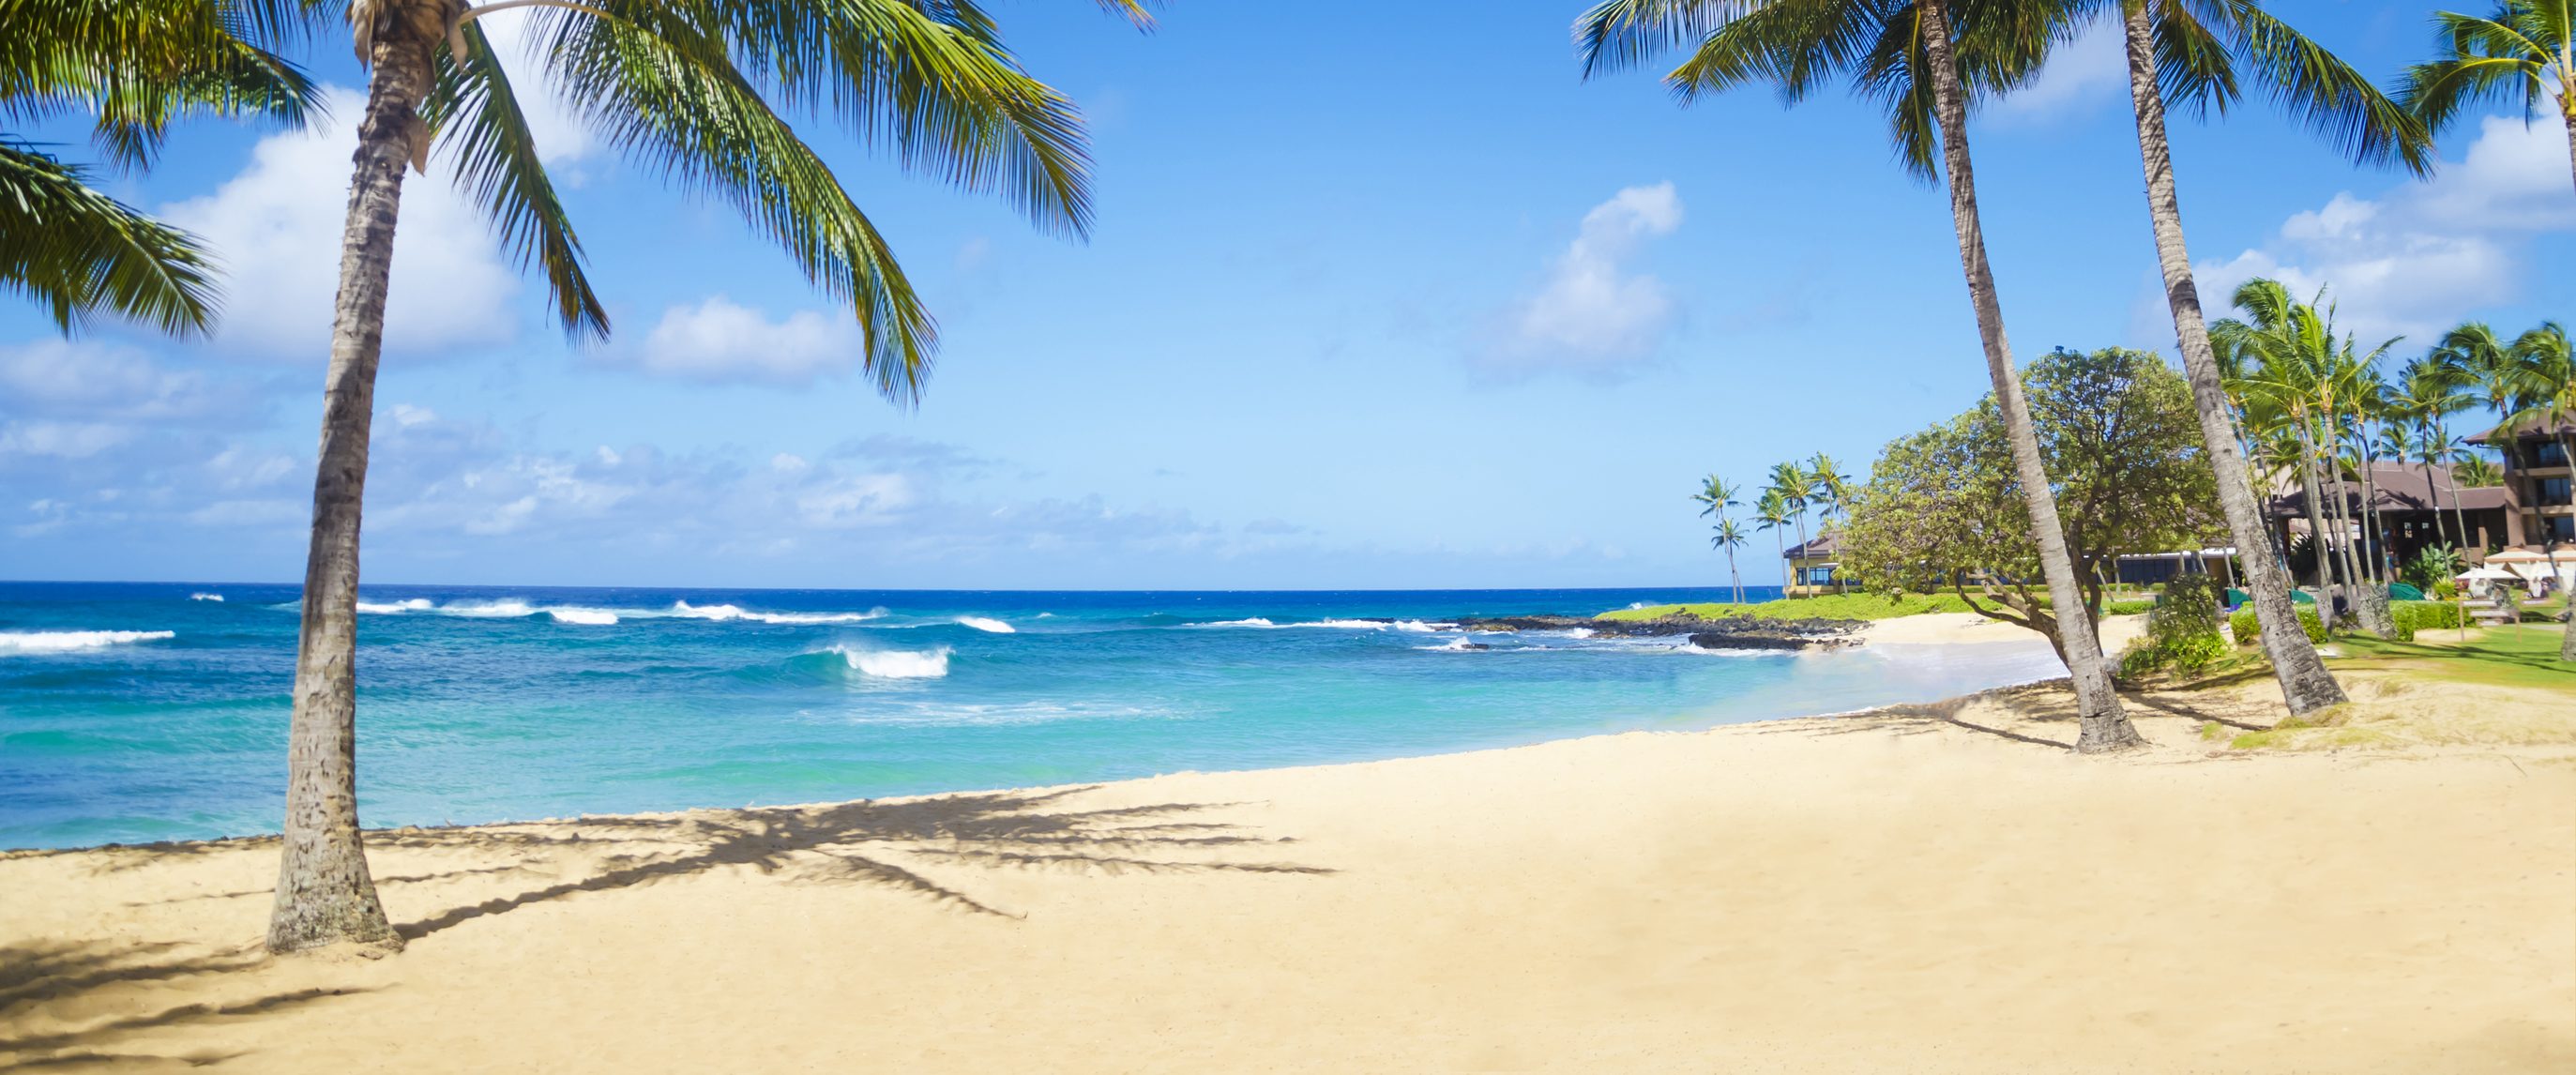 Round-trip flights to Hawaii from $296